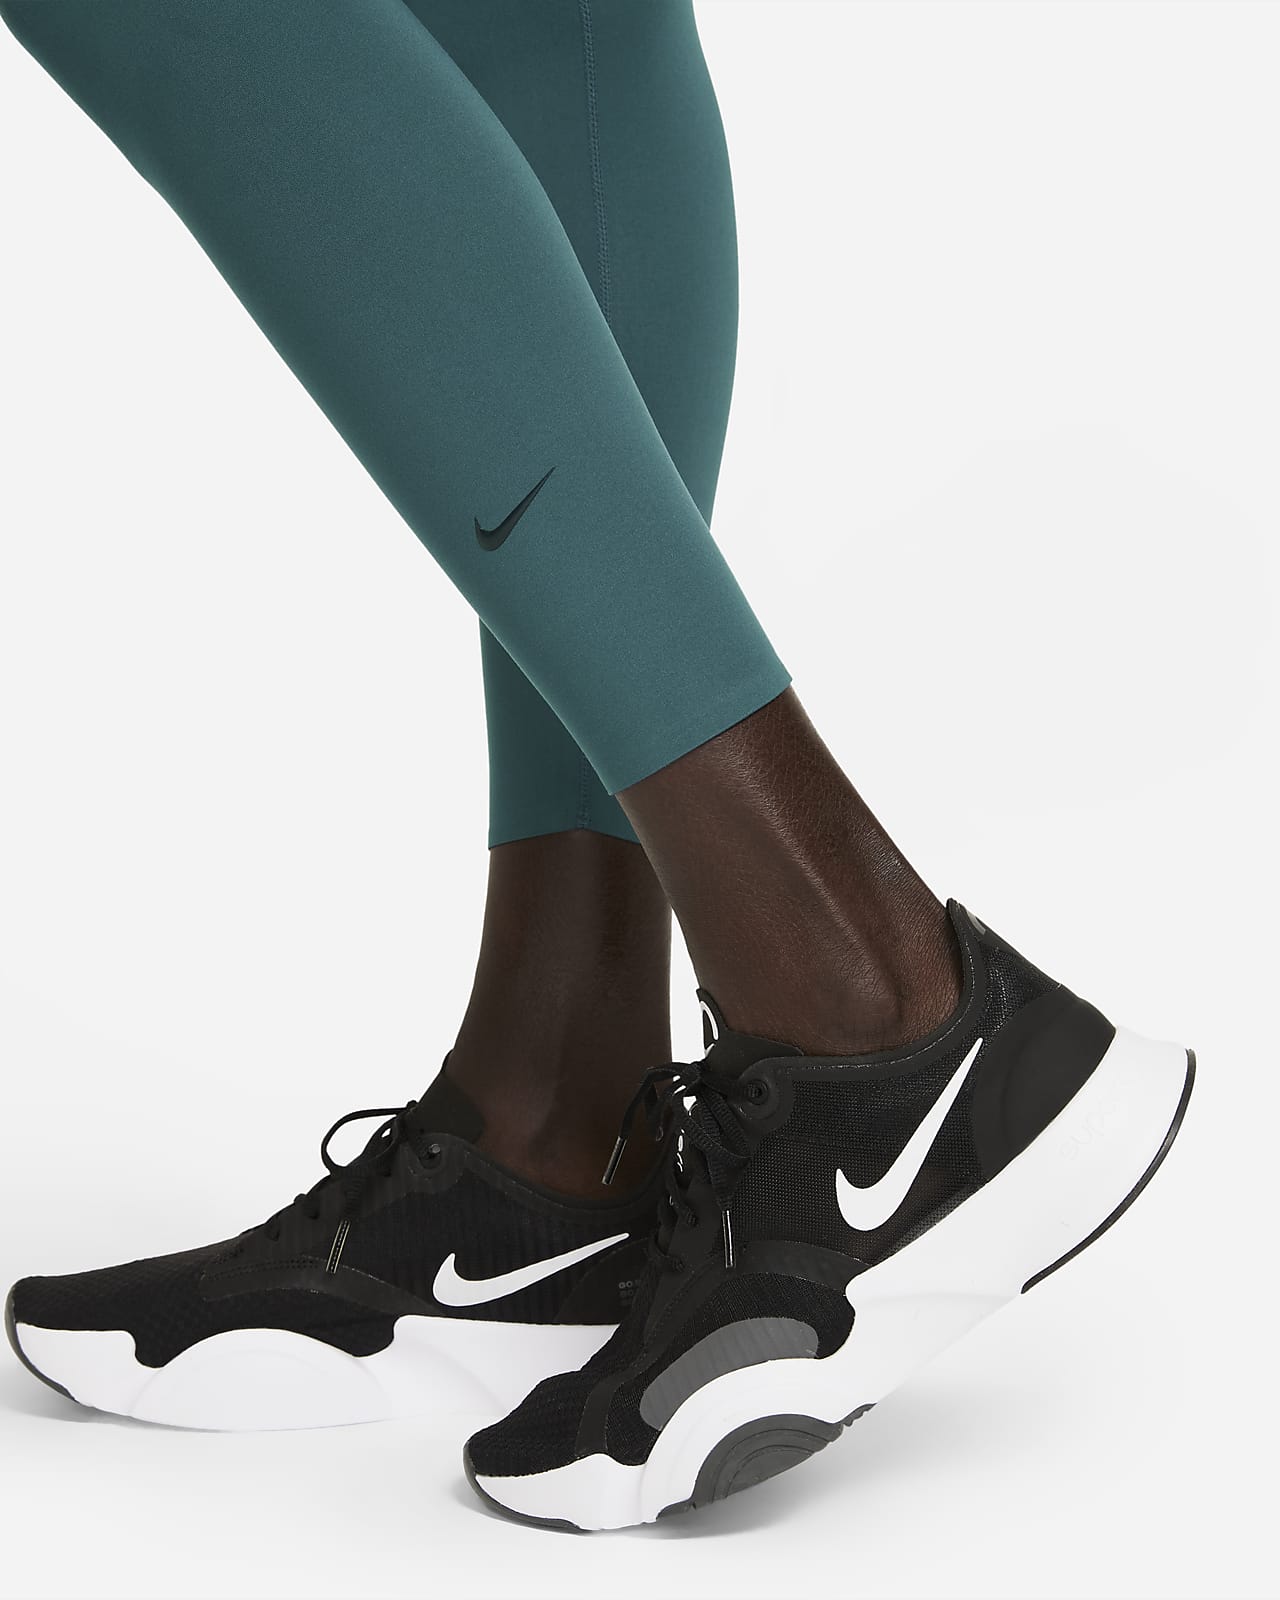 Nike One Women's 7/8 Color Block Tights CJ2450-073 Size L : :  Clothing & Accessories